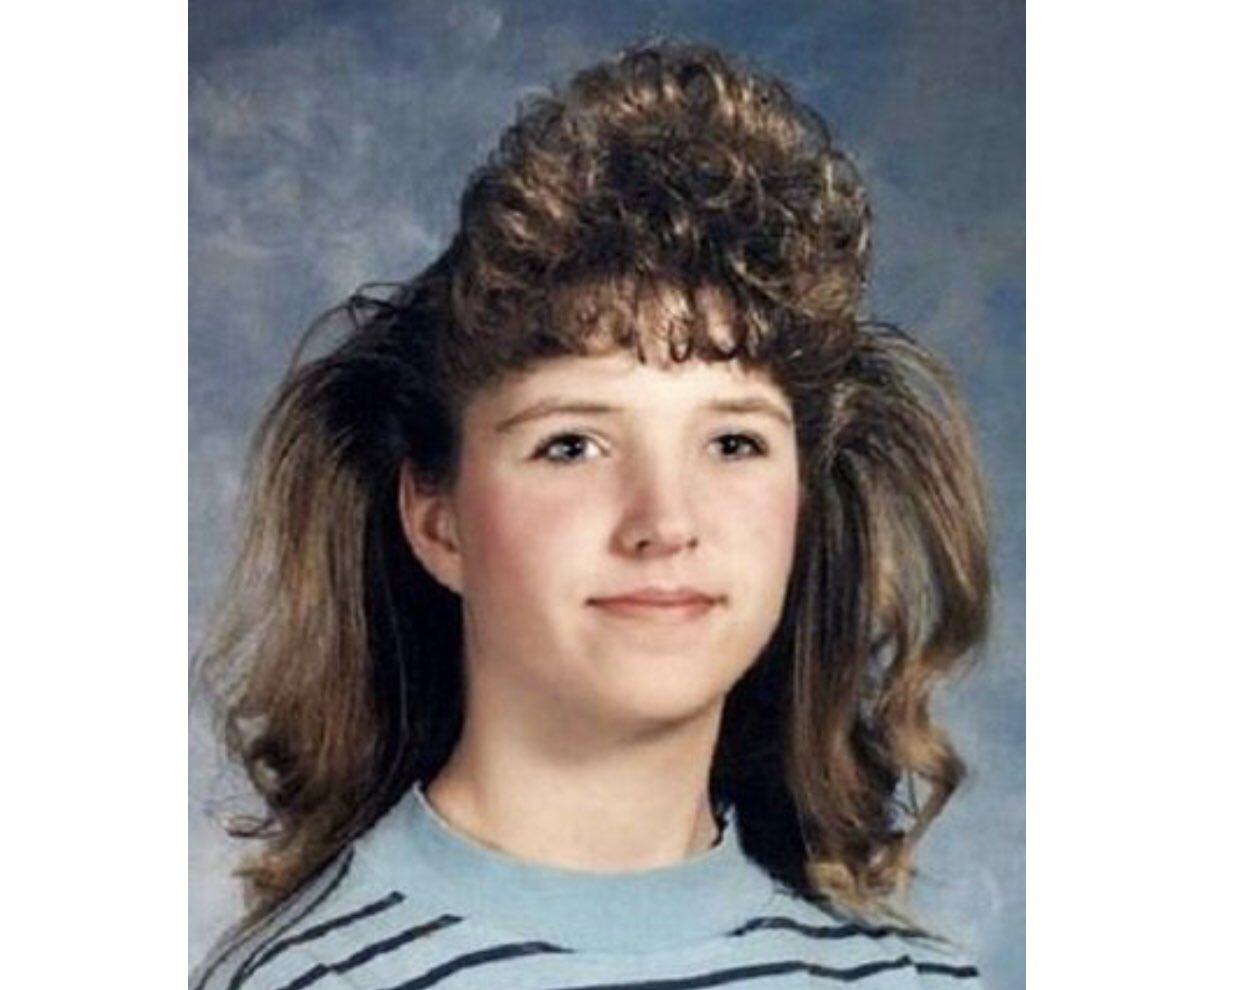 My mom in the 80's she was between 35-40 years old here. What in the spiral  perm, big hair, frosted highlights is going on here? | Instagram